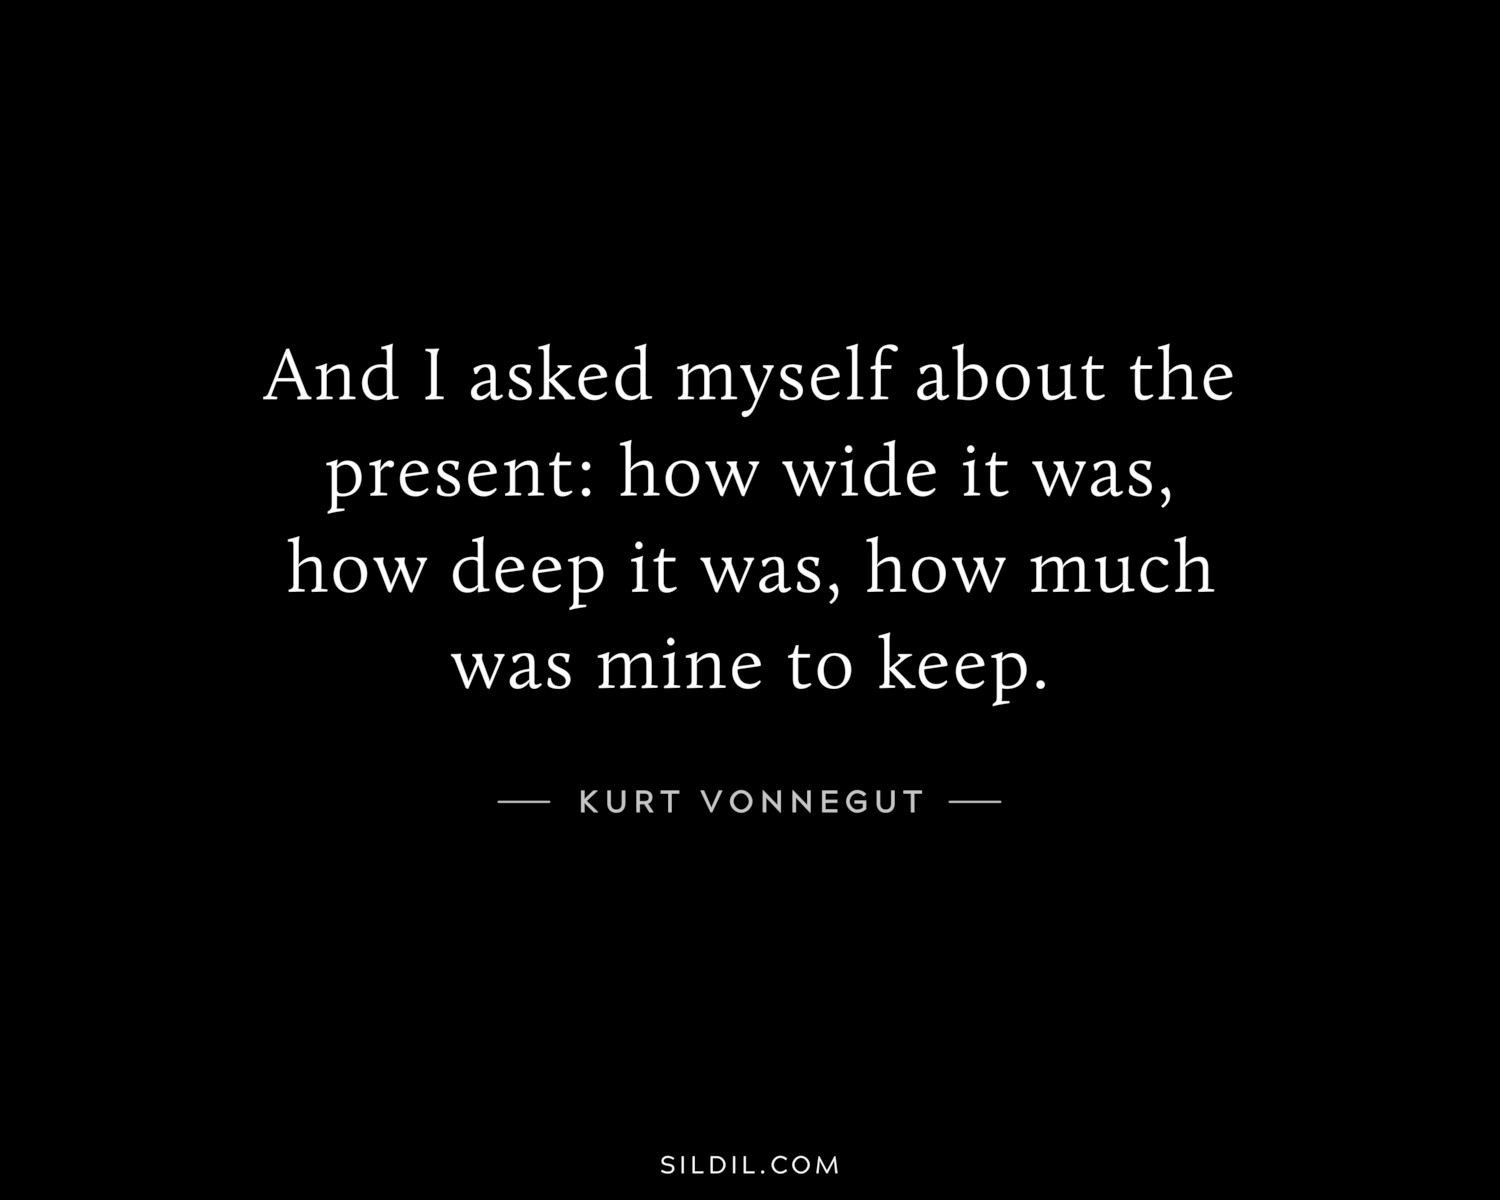 And I asked myself about the present: how wide it was, how deep it was, how much was mine to keep.